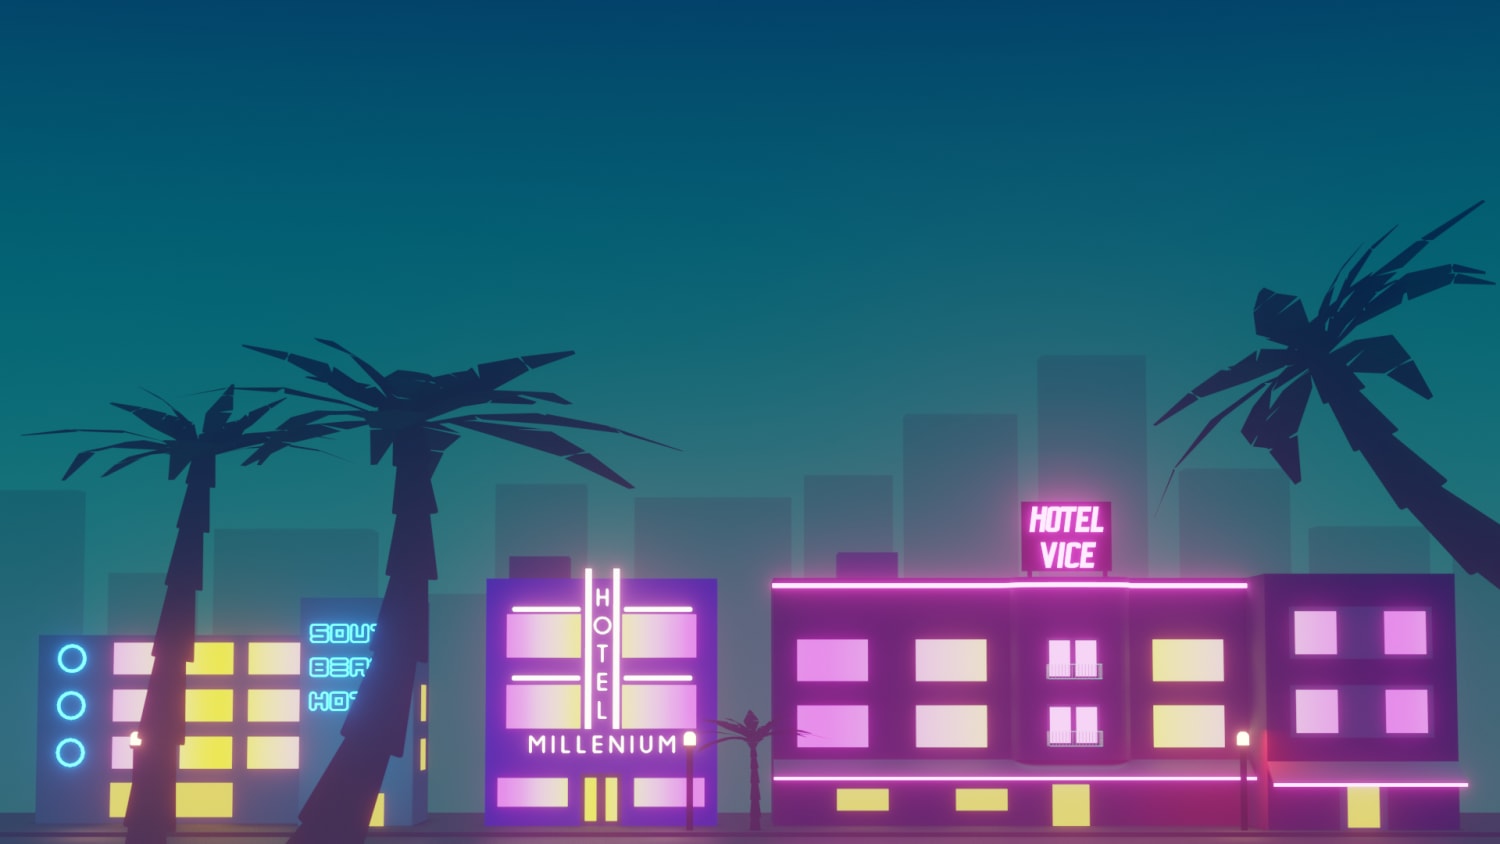 Miami Vice (Used an illustration by u/mletourn as reference)